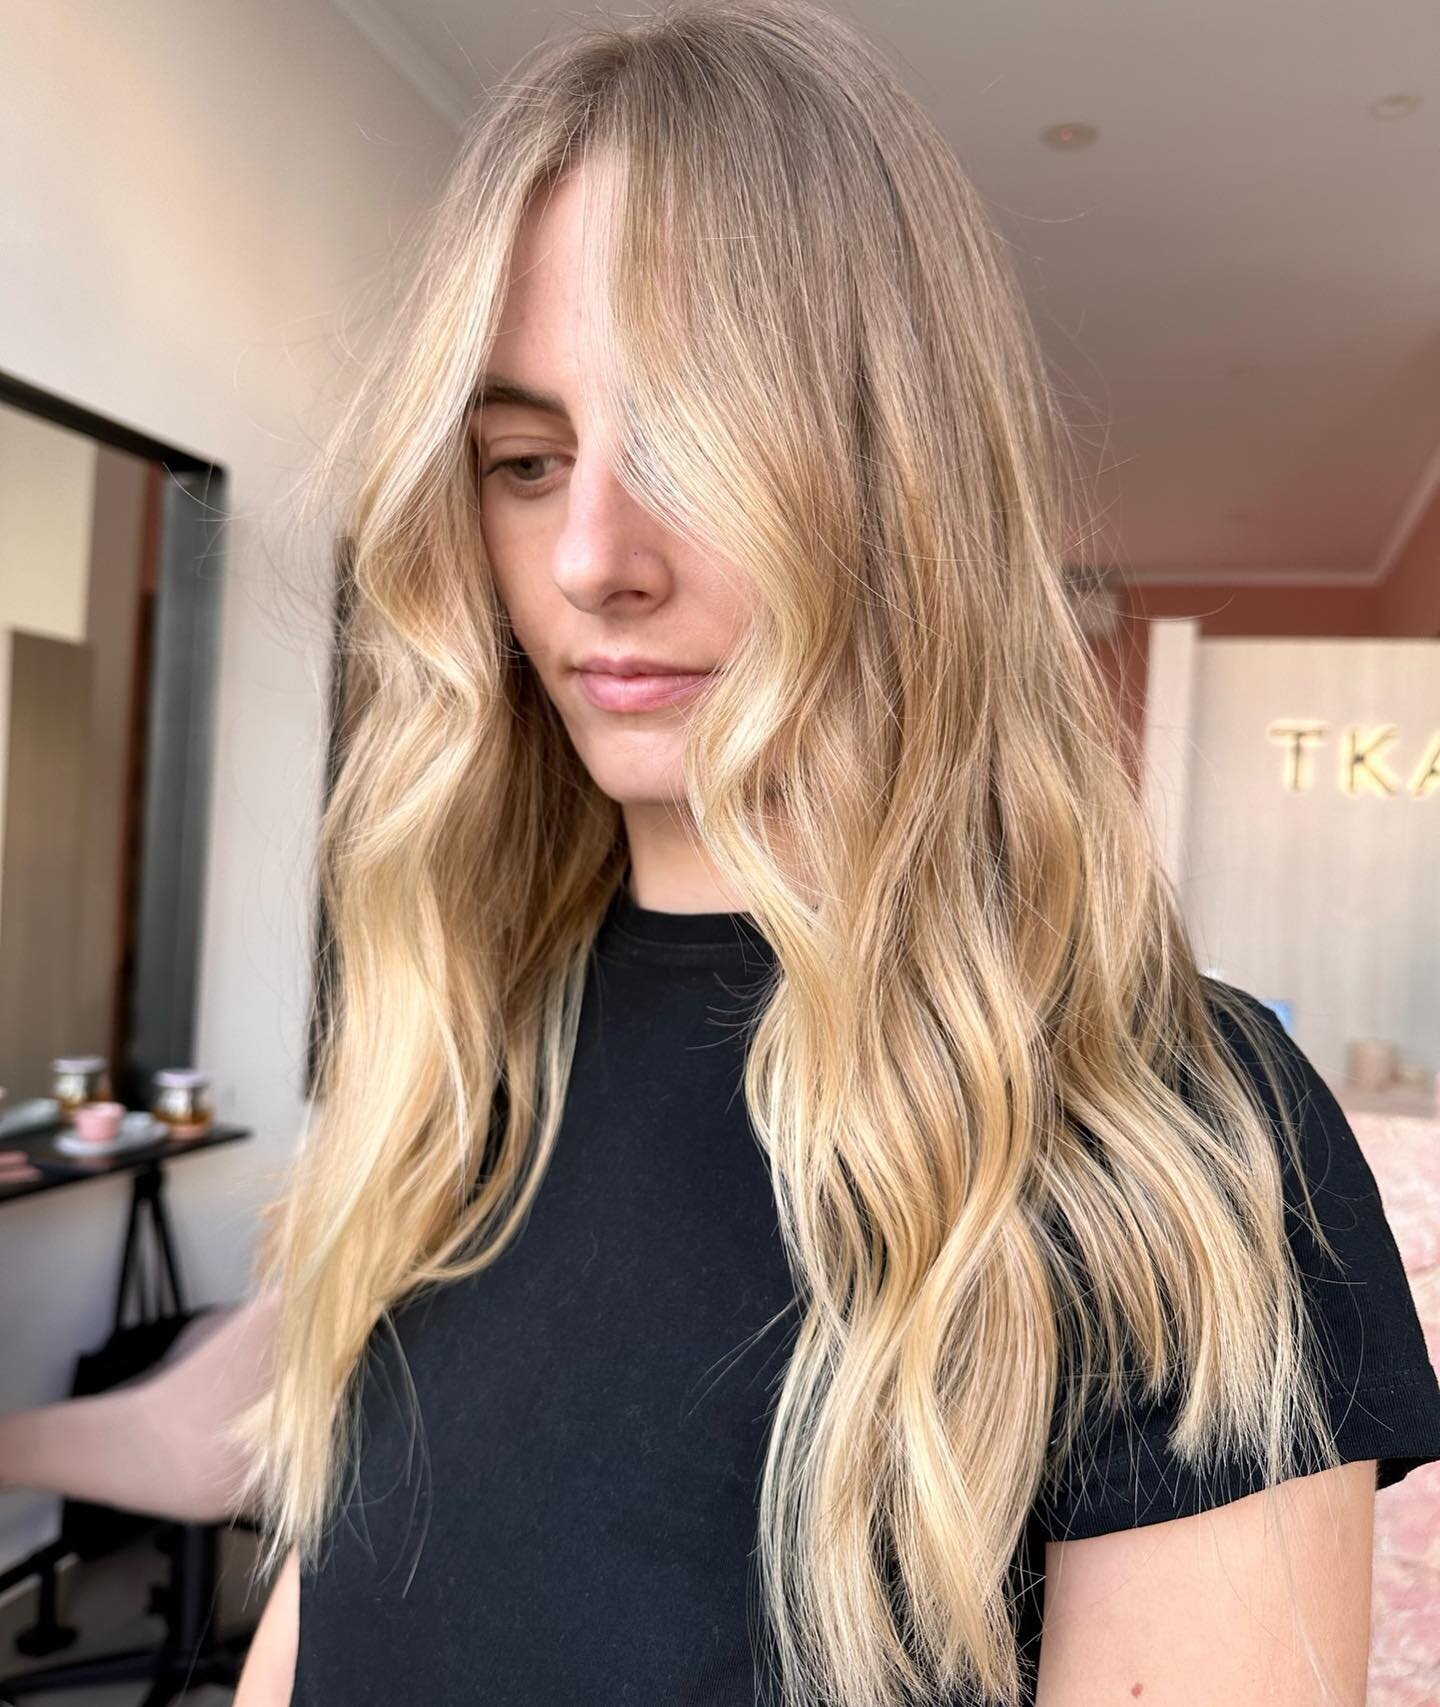 &bull; S E A M L E S S &bull;

This beautiful golden goddess was all done by freehand balayage 👏👏 by our gal Maddy ✨

This colour will be low- maintenance &amp; remain just as sexy as it grows out 😏🩷 

We love a bit of freehand here at TKAY 🫶
&b